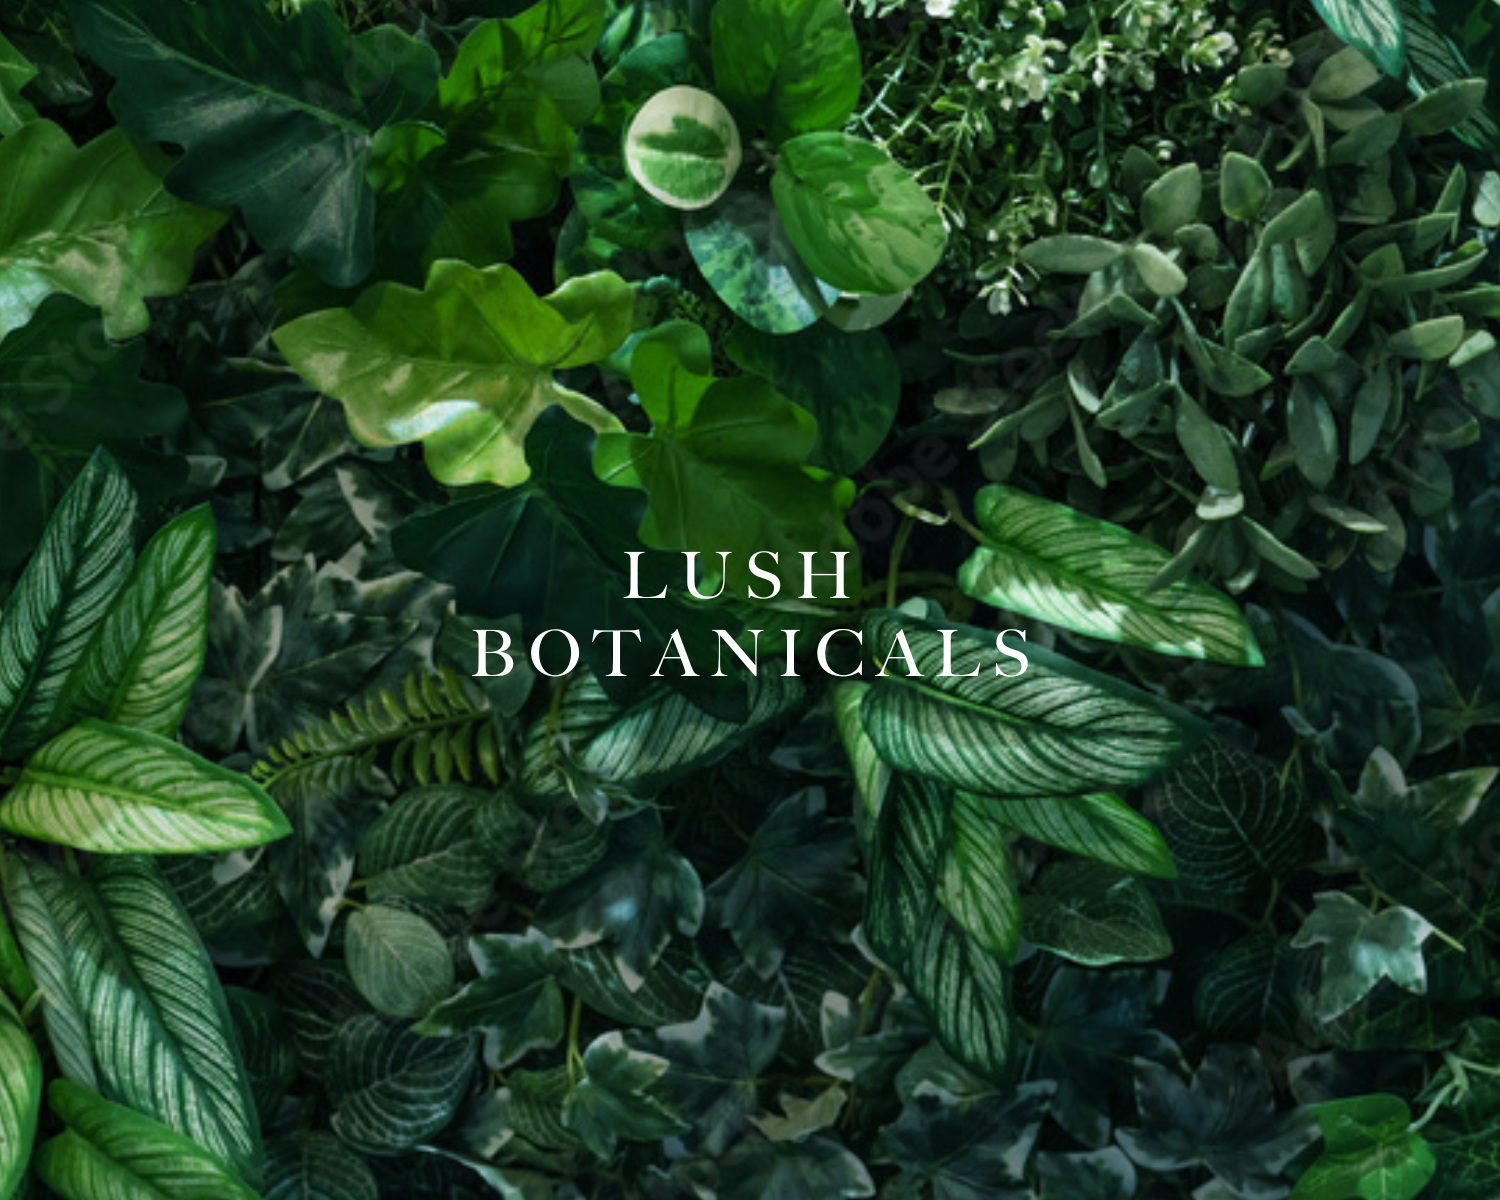 Caswell-Massey Sandalwood Eau de Toilette: image of a mix of green plant leaves to represent botanicals as a scent notes